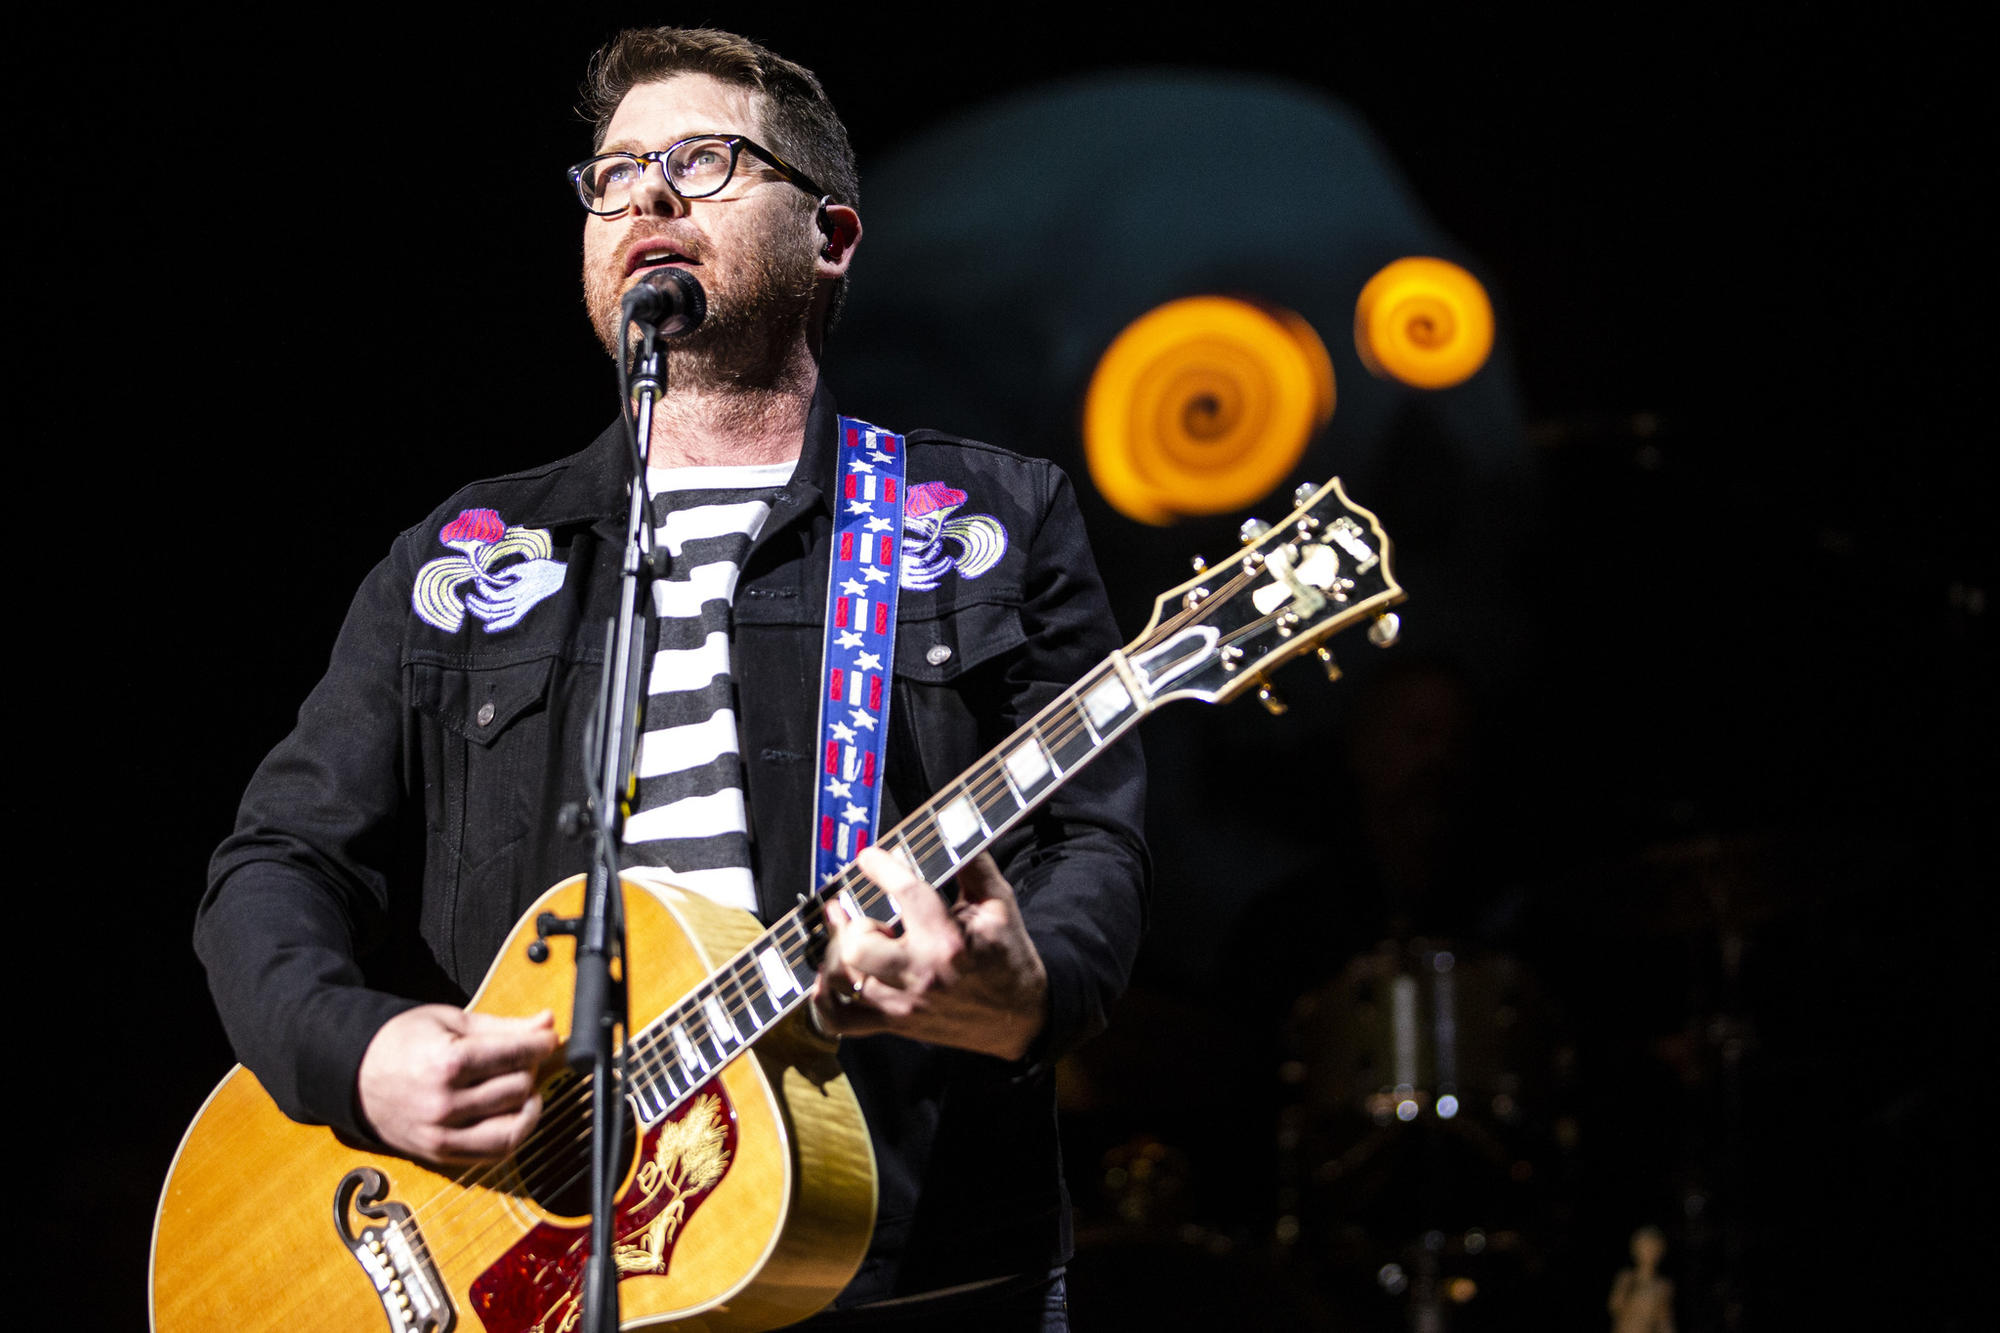 Colin Meloy of the Decemberists during a performance at the Red Rocks Amphitheater.